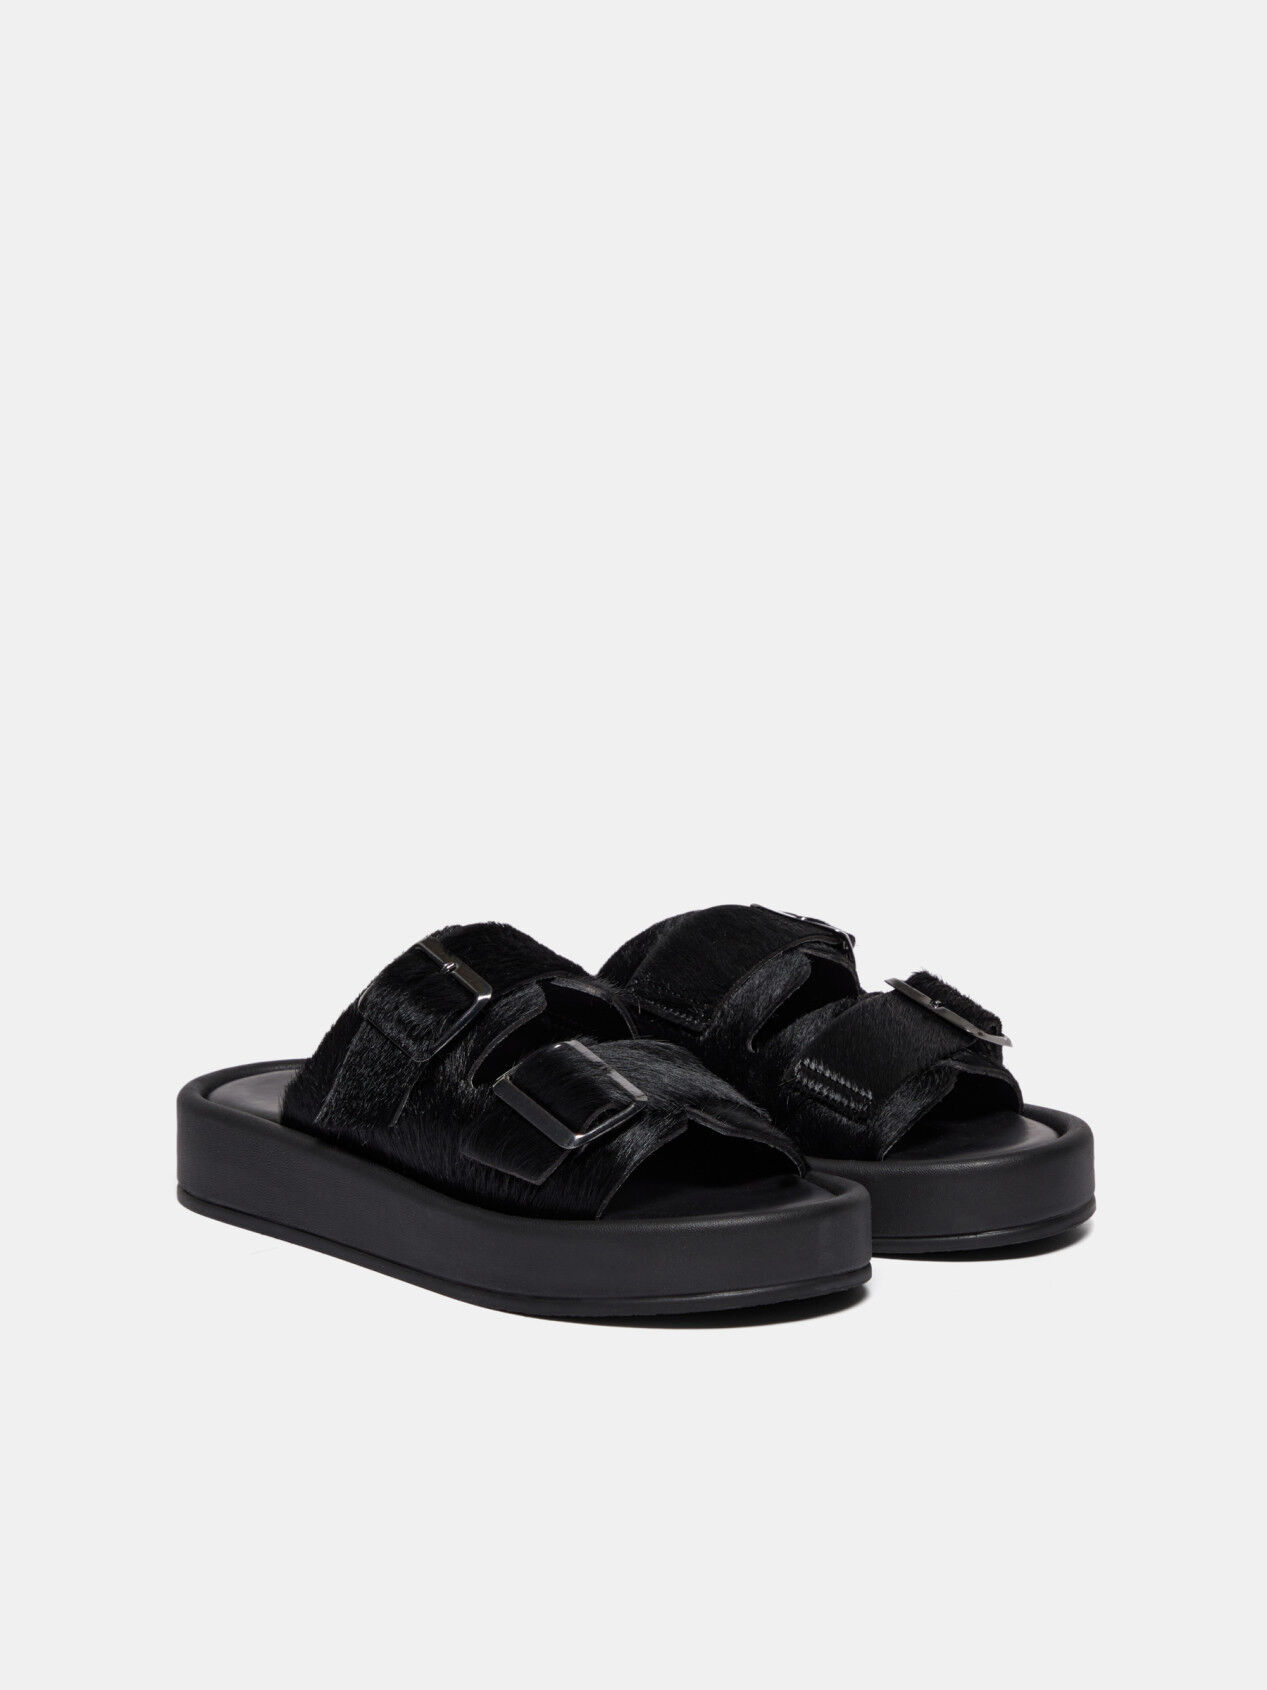 Neuman Black Loafers for Unisex - Fall/Winter collection - Camper USA